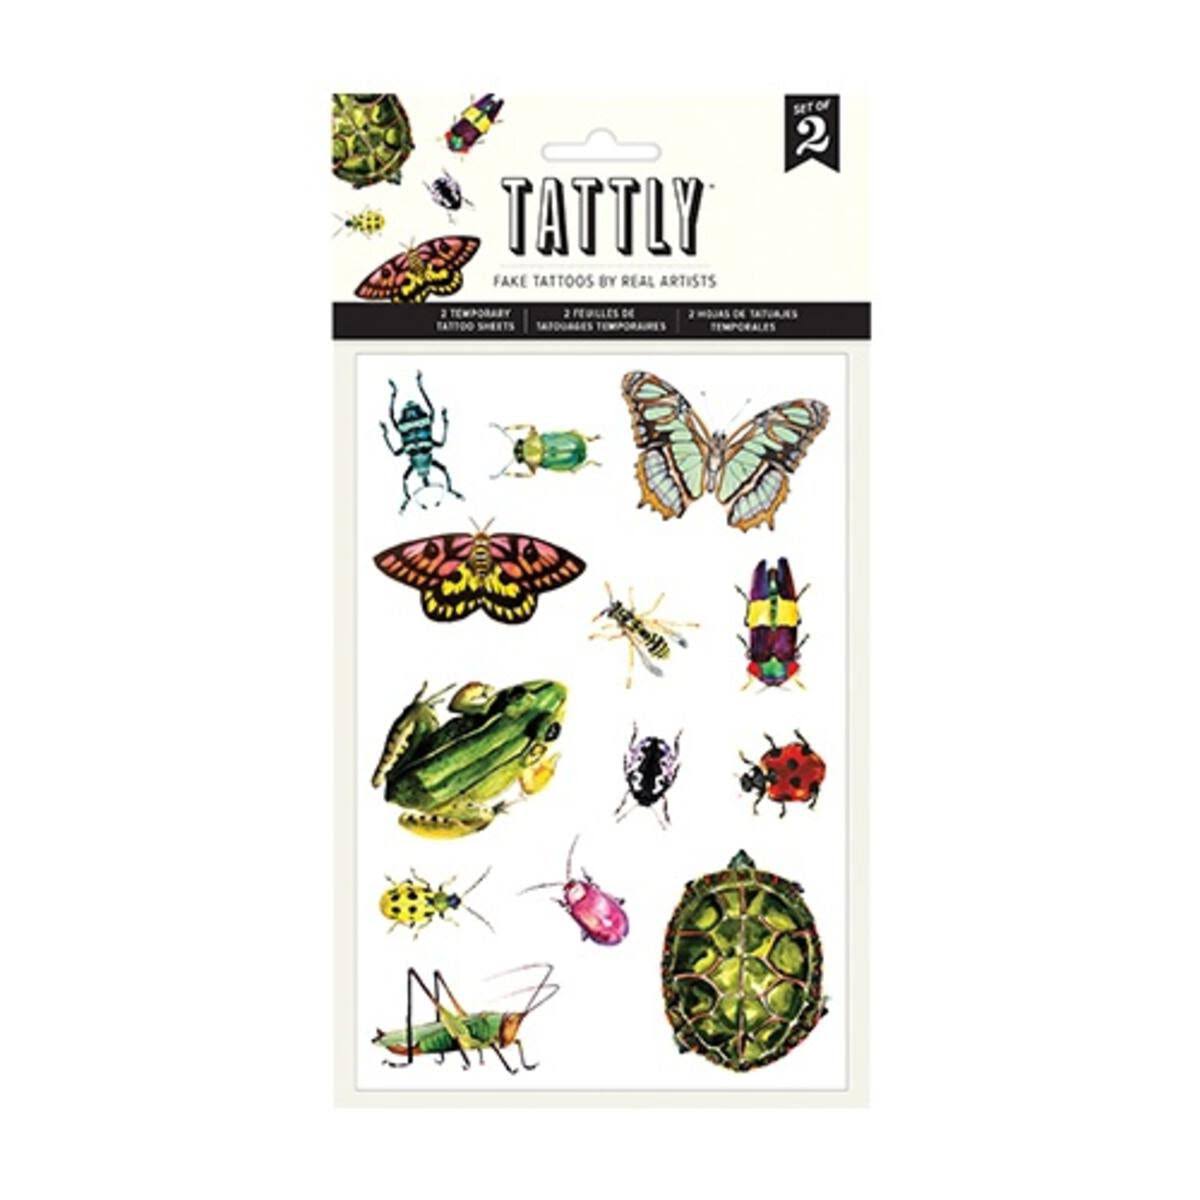 Tattly Sheet Critters on The Move Tattoos